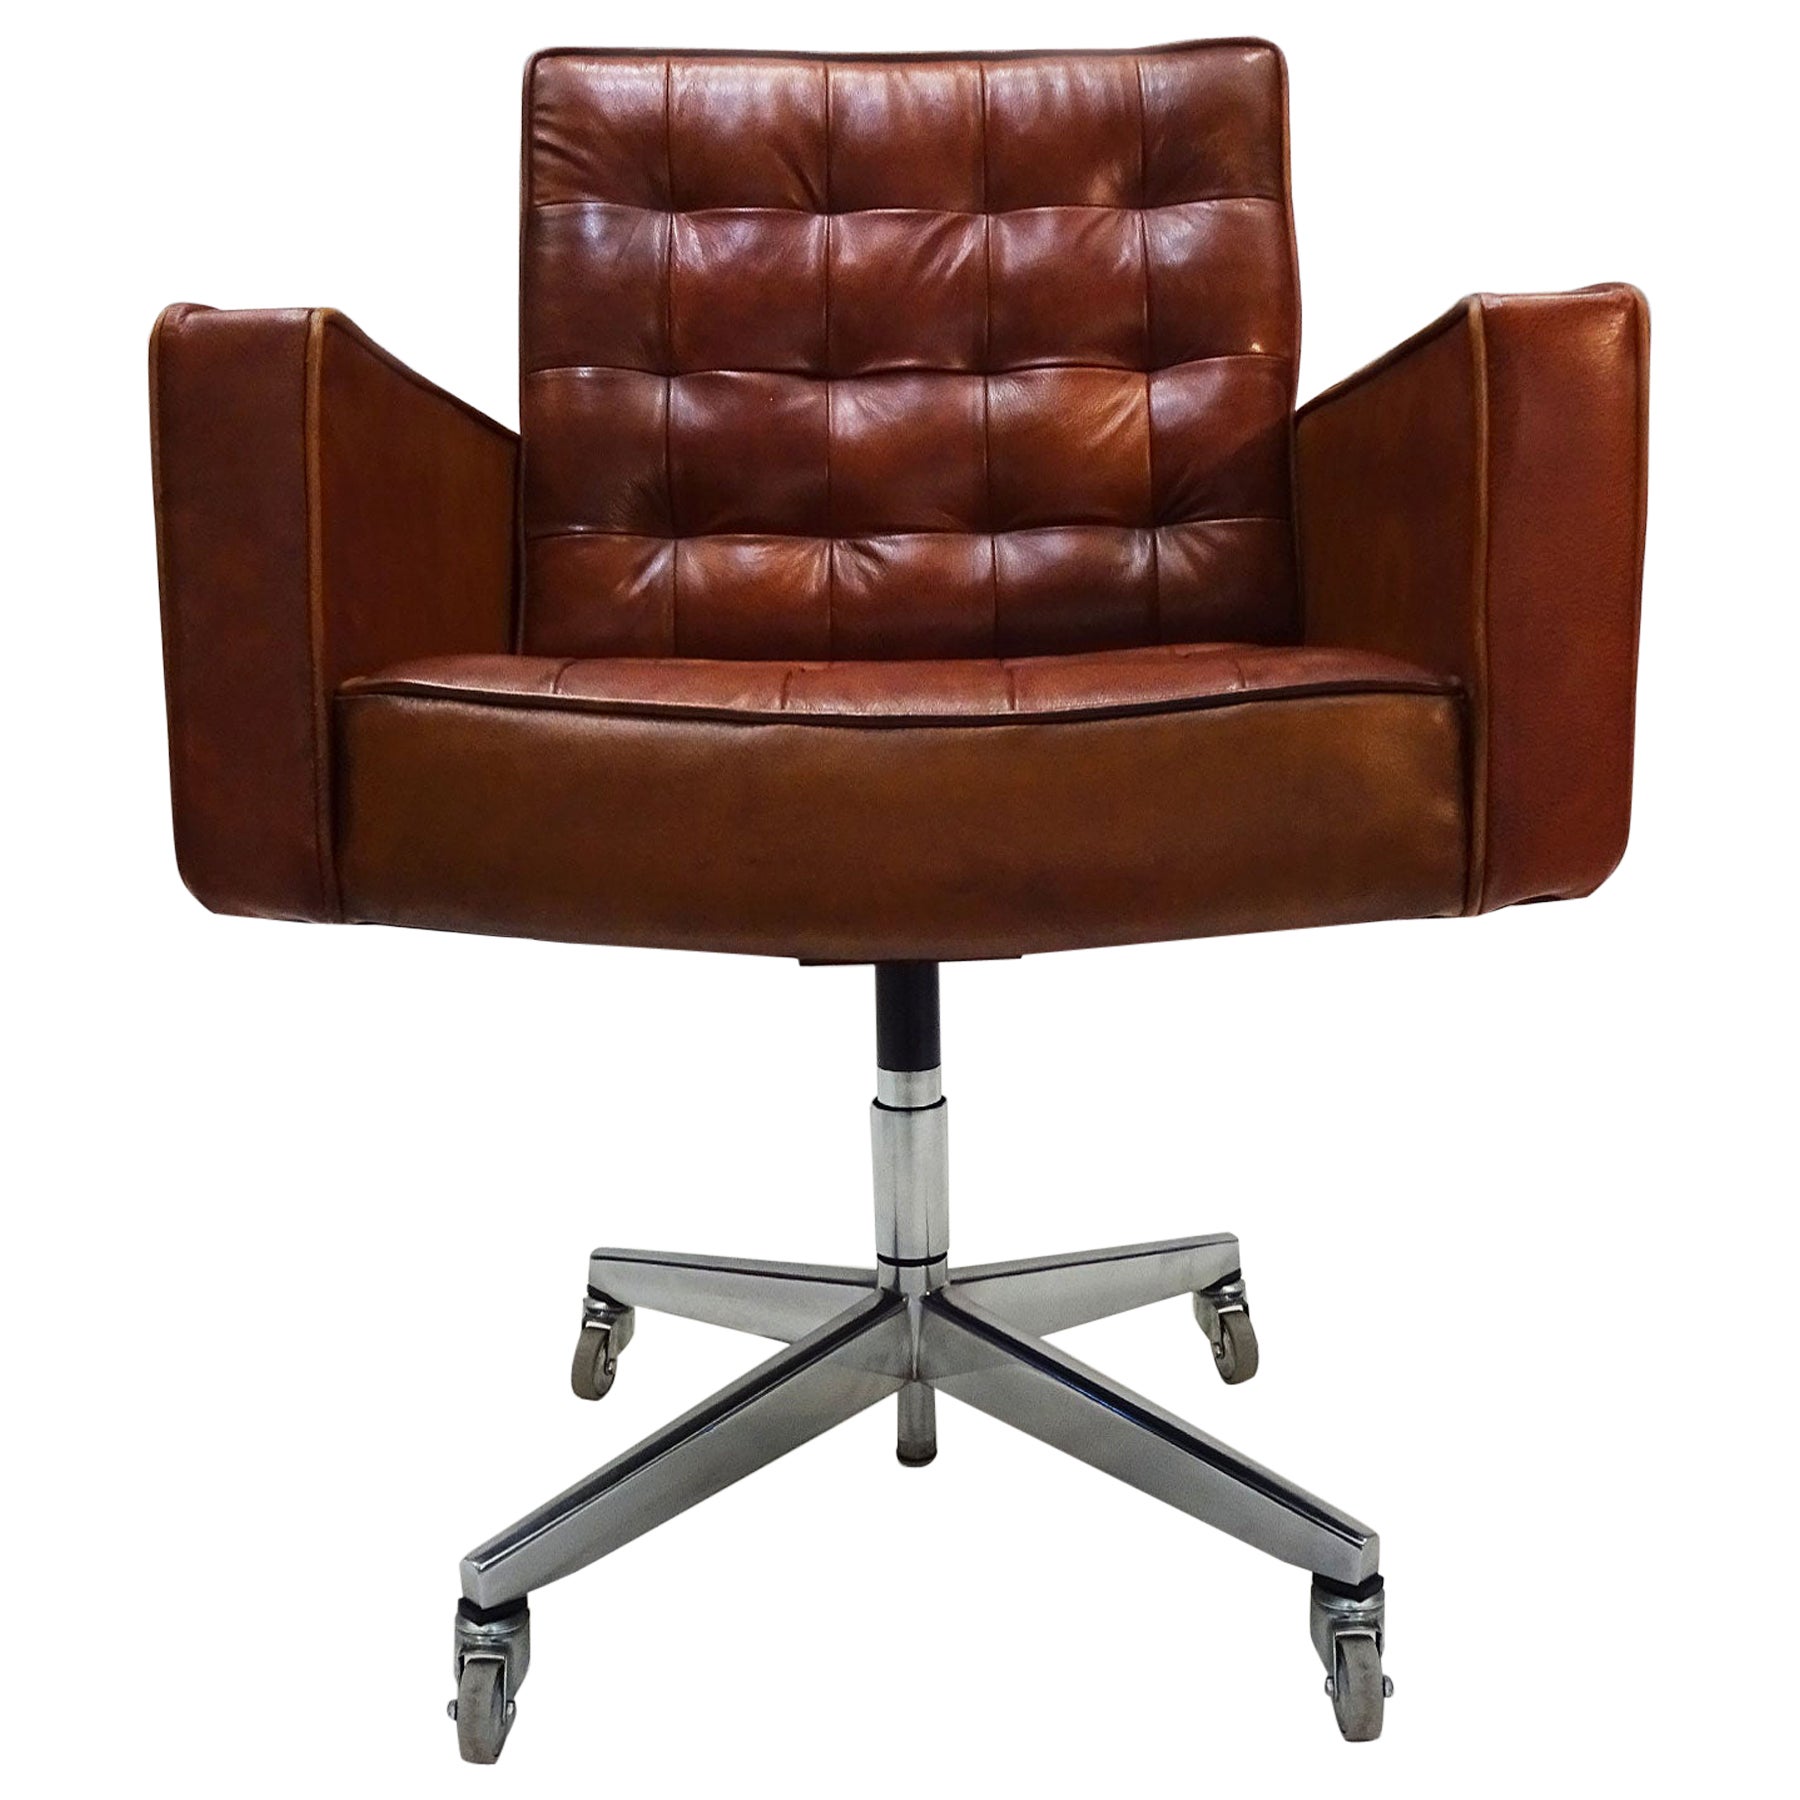 Shaw Walker Model 8312 Restored Wood And Aluminum Arm Chair At 1stdibs